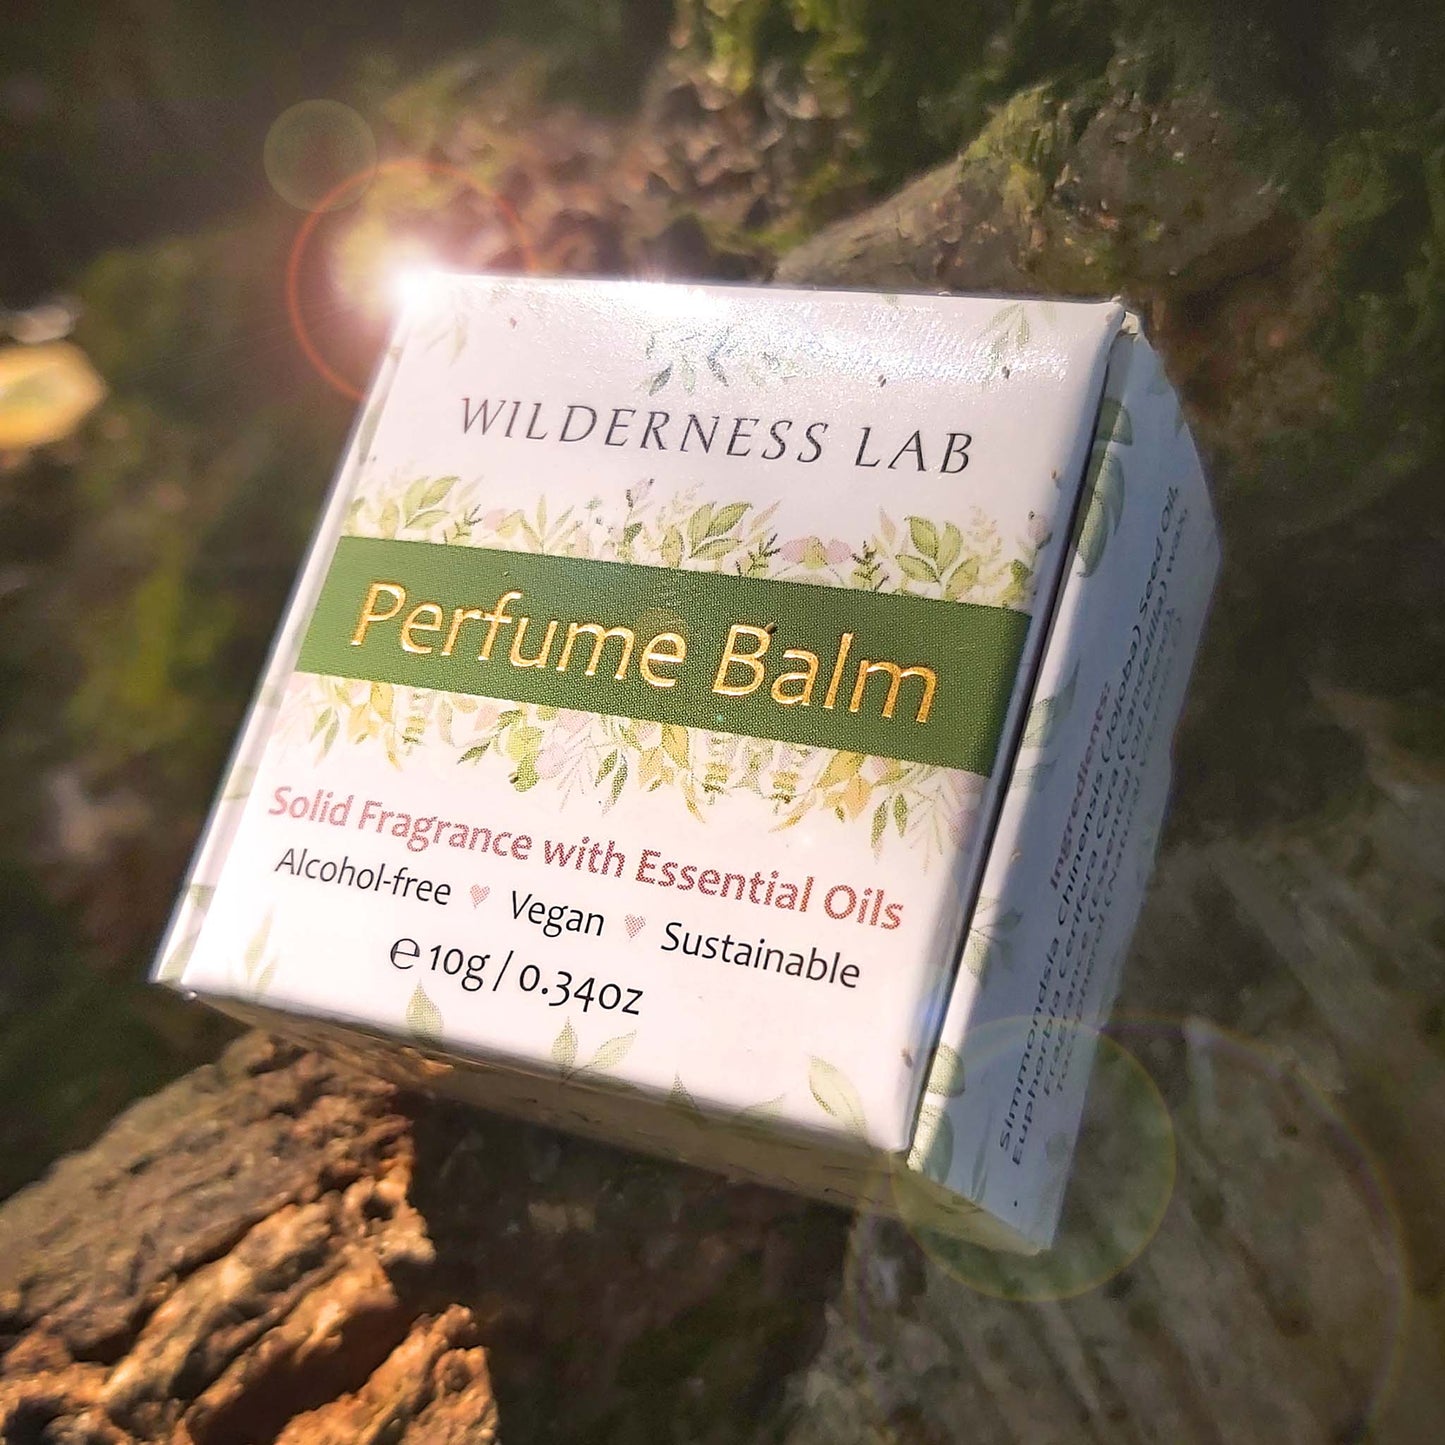 Wilderness Lab Gift Card - takes the pressure off you choosing!